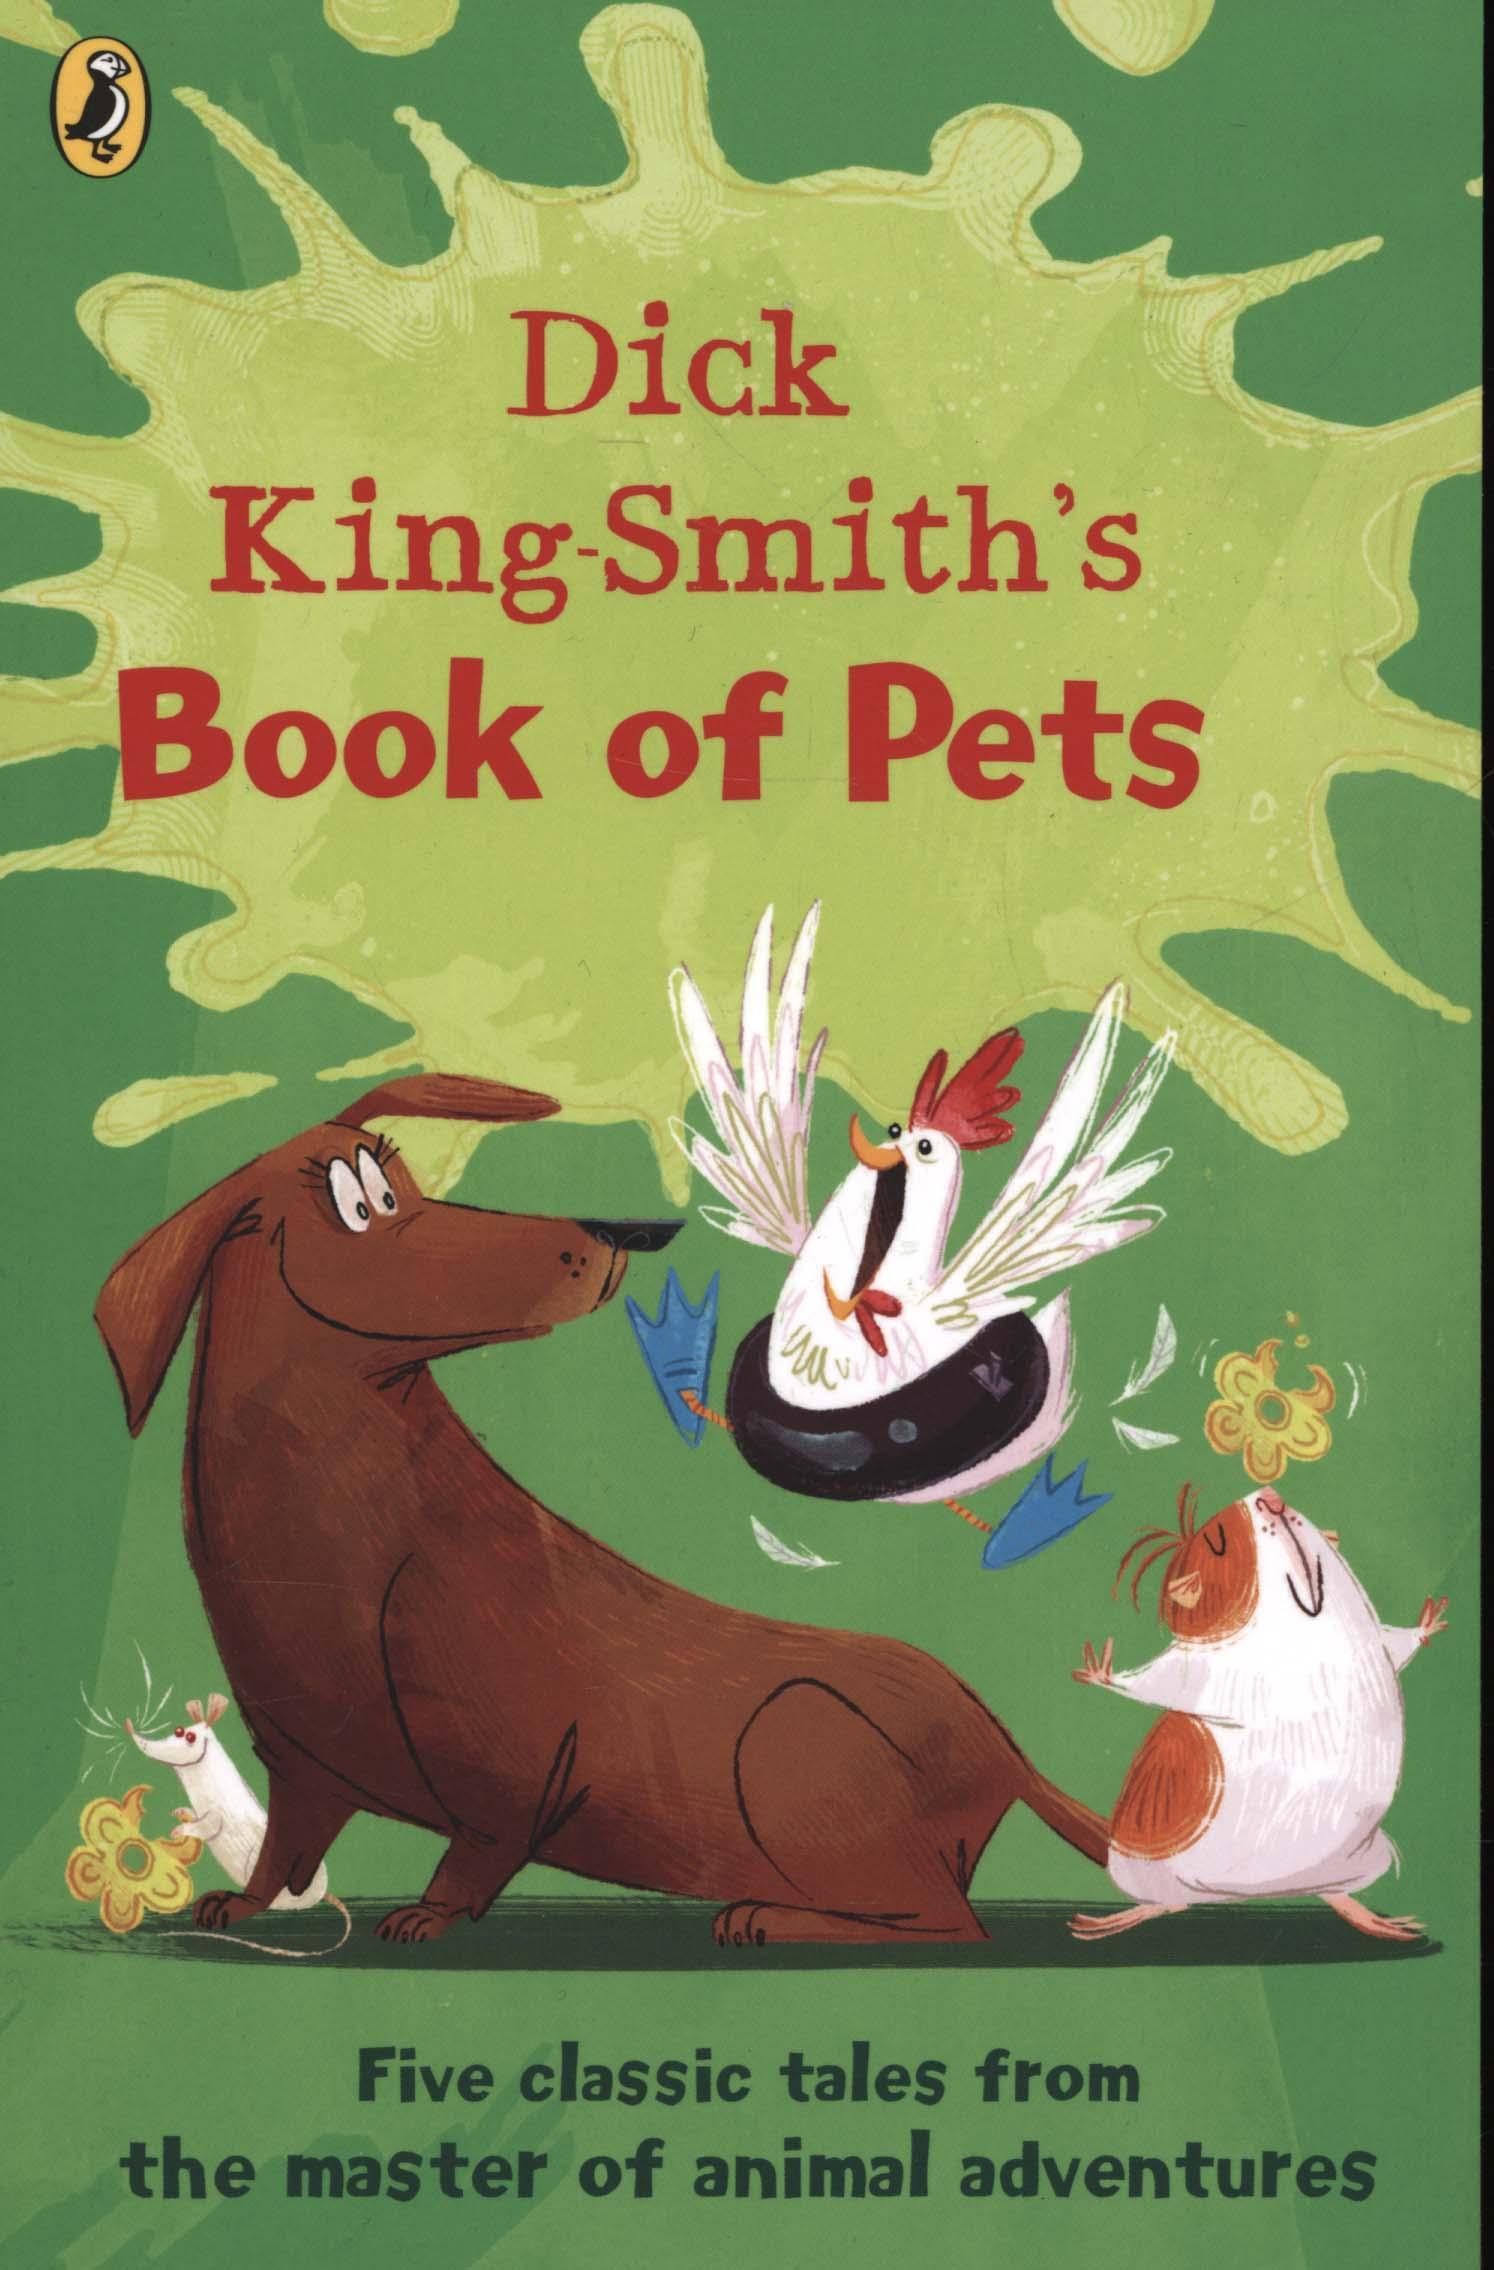 Dick King-Smith’s Book of Pets: Five classic tales from the master of animal adventures